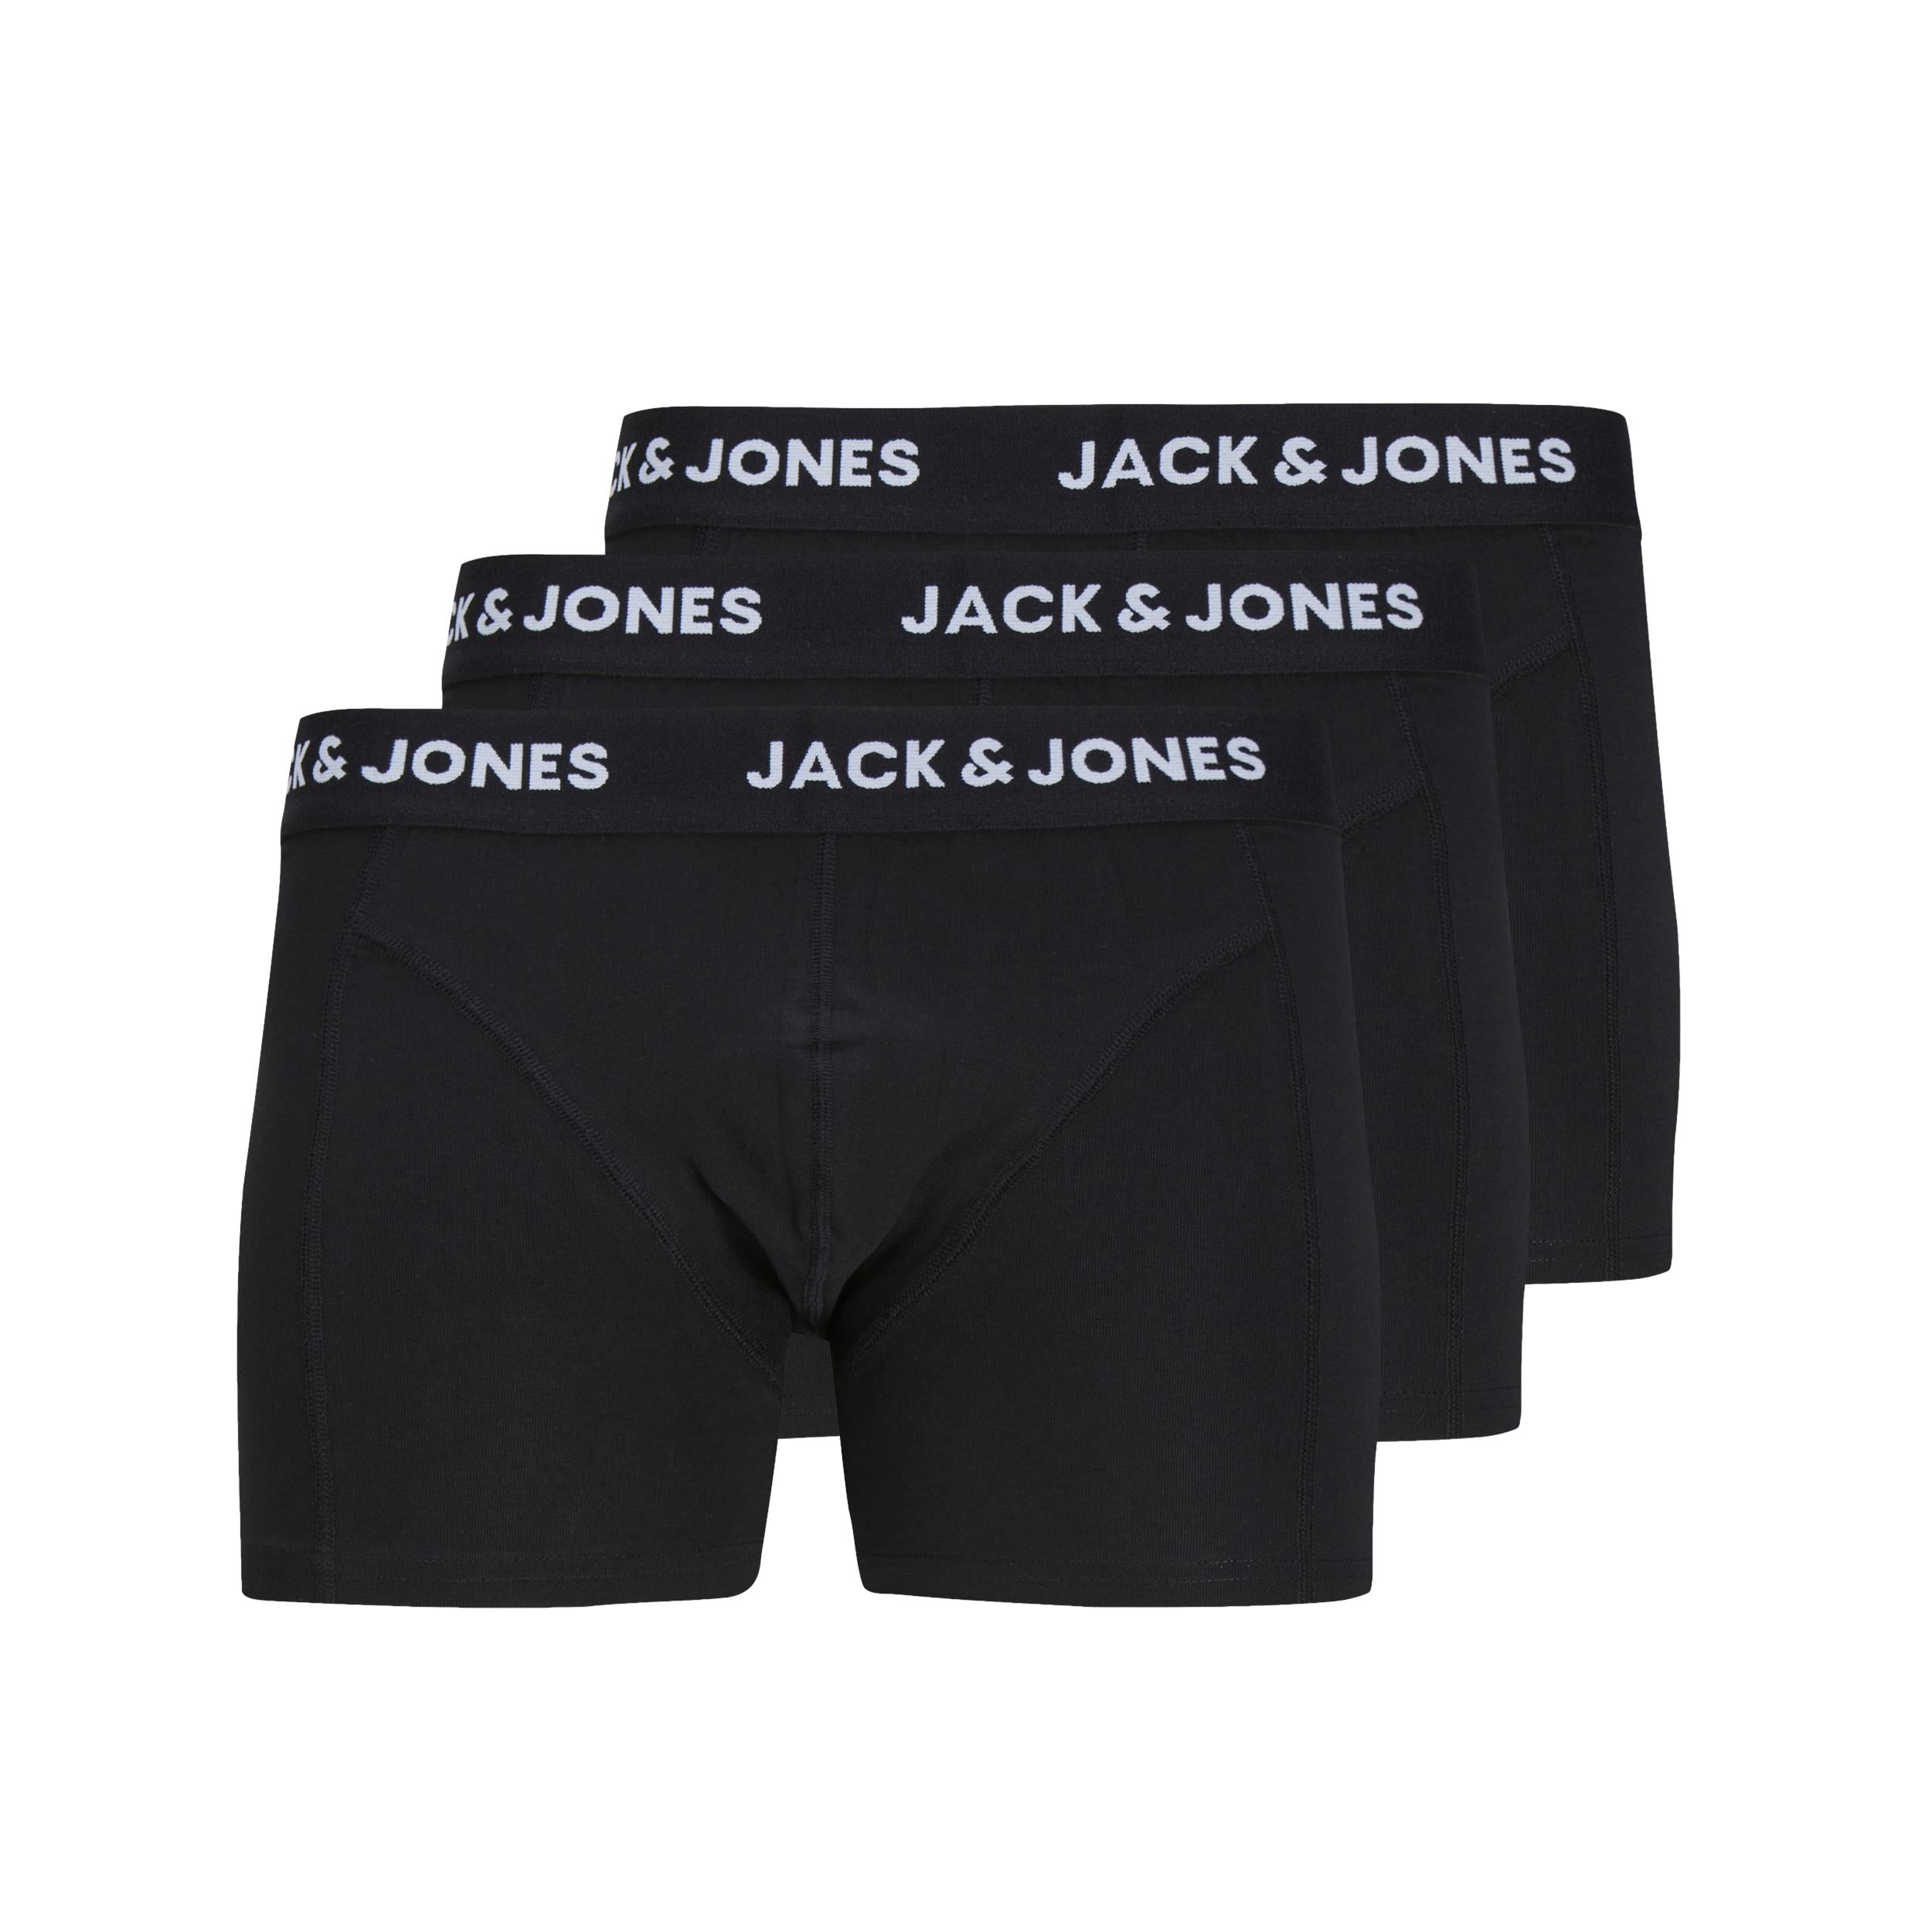 Jacanthony Trunks 3 Pack - Black - The Sons online